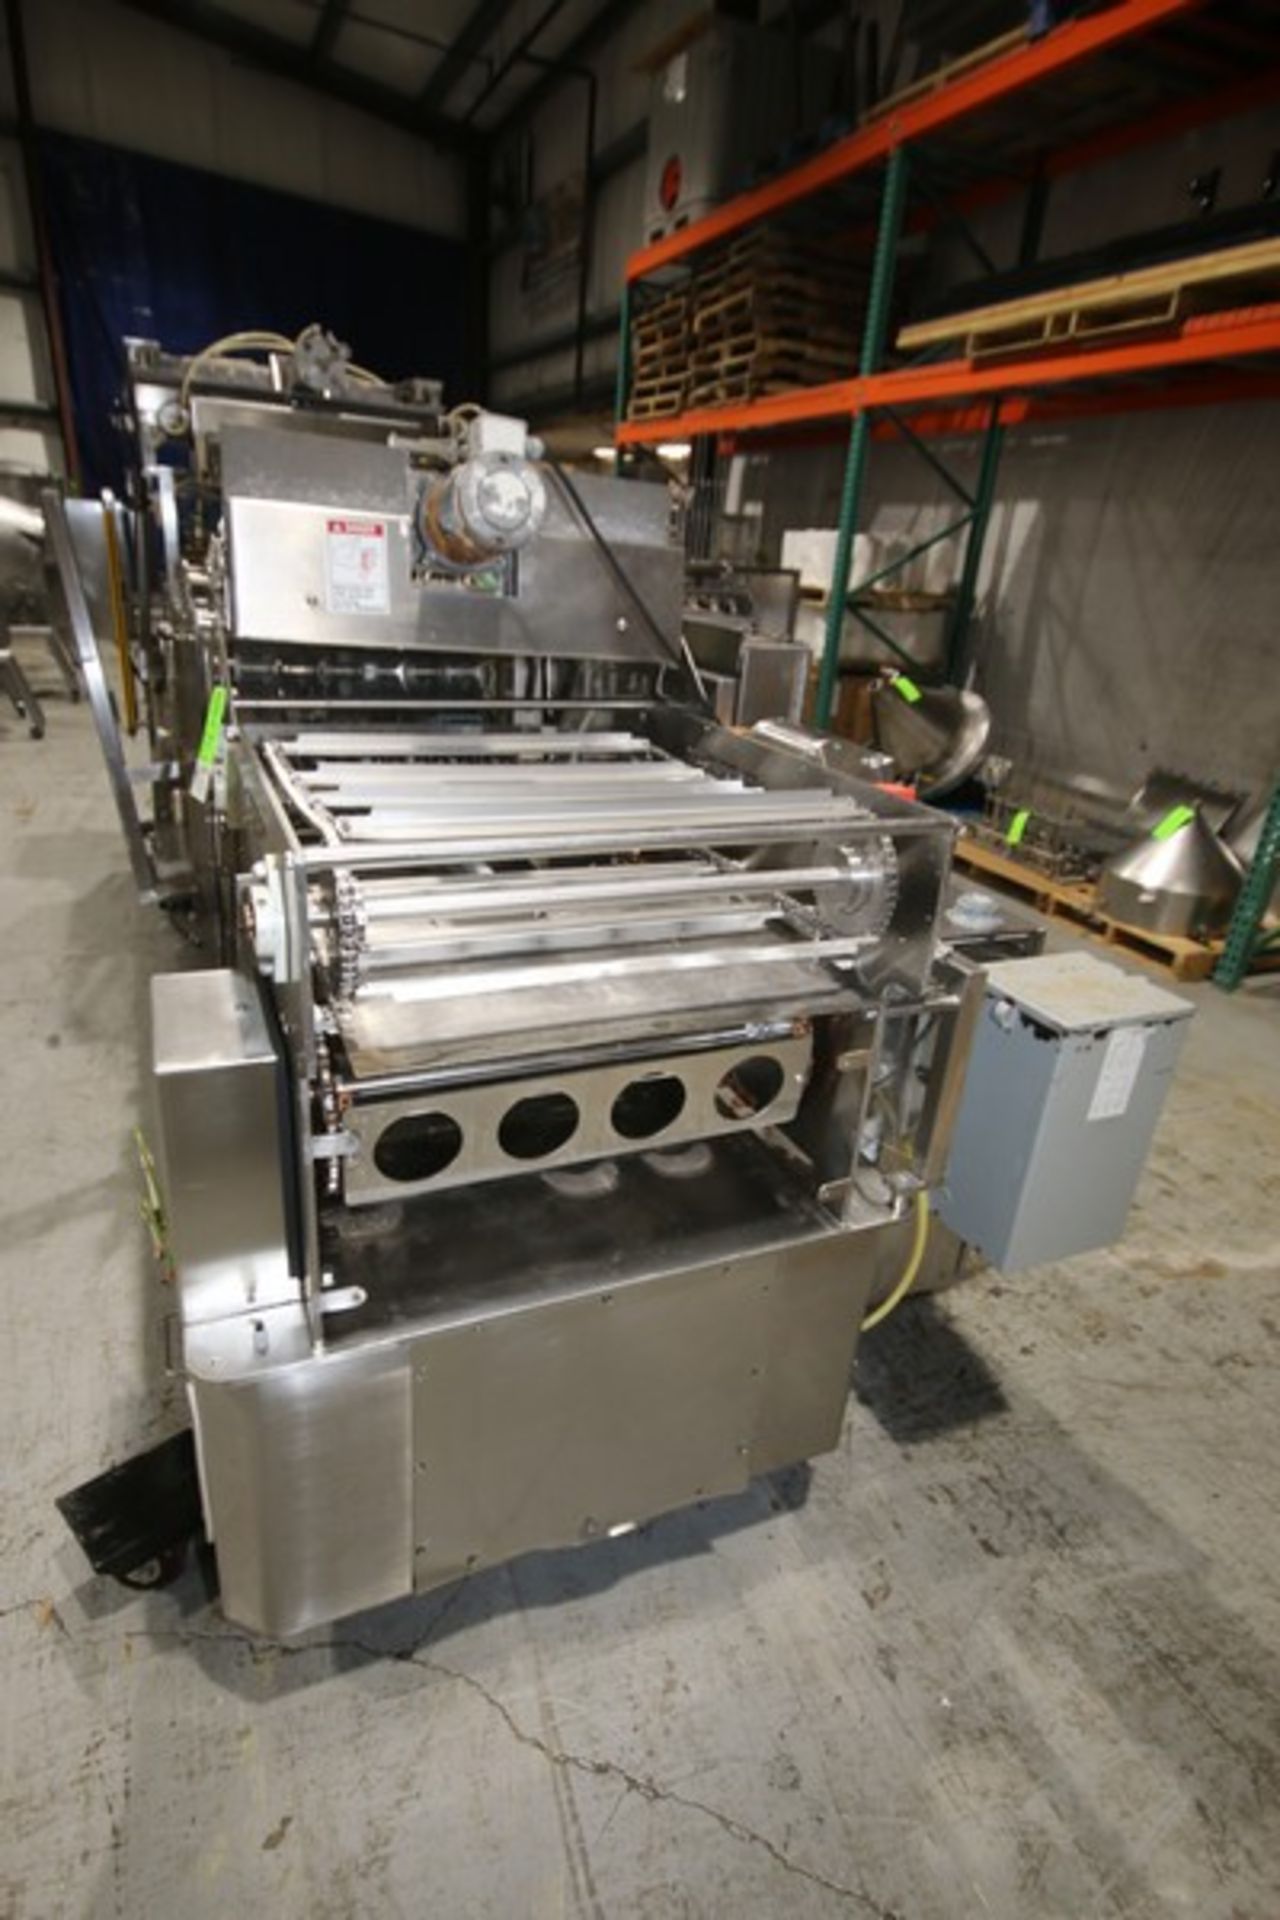 2008 PAC Tec 4 - Wide S/S Cup Filler, SN 2201, with 4 1/4" W Change Parts, Cup Inserter, Tamper - Image 5 of 13